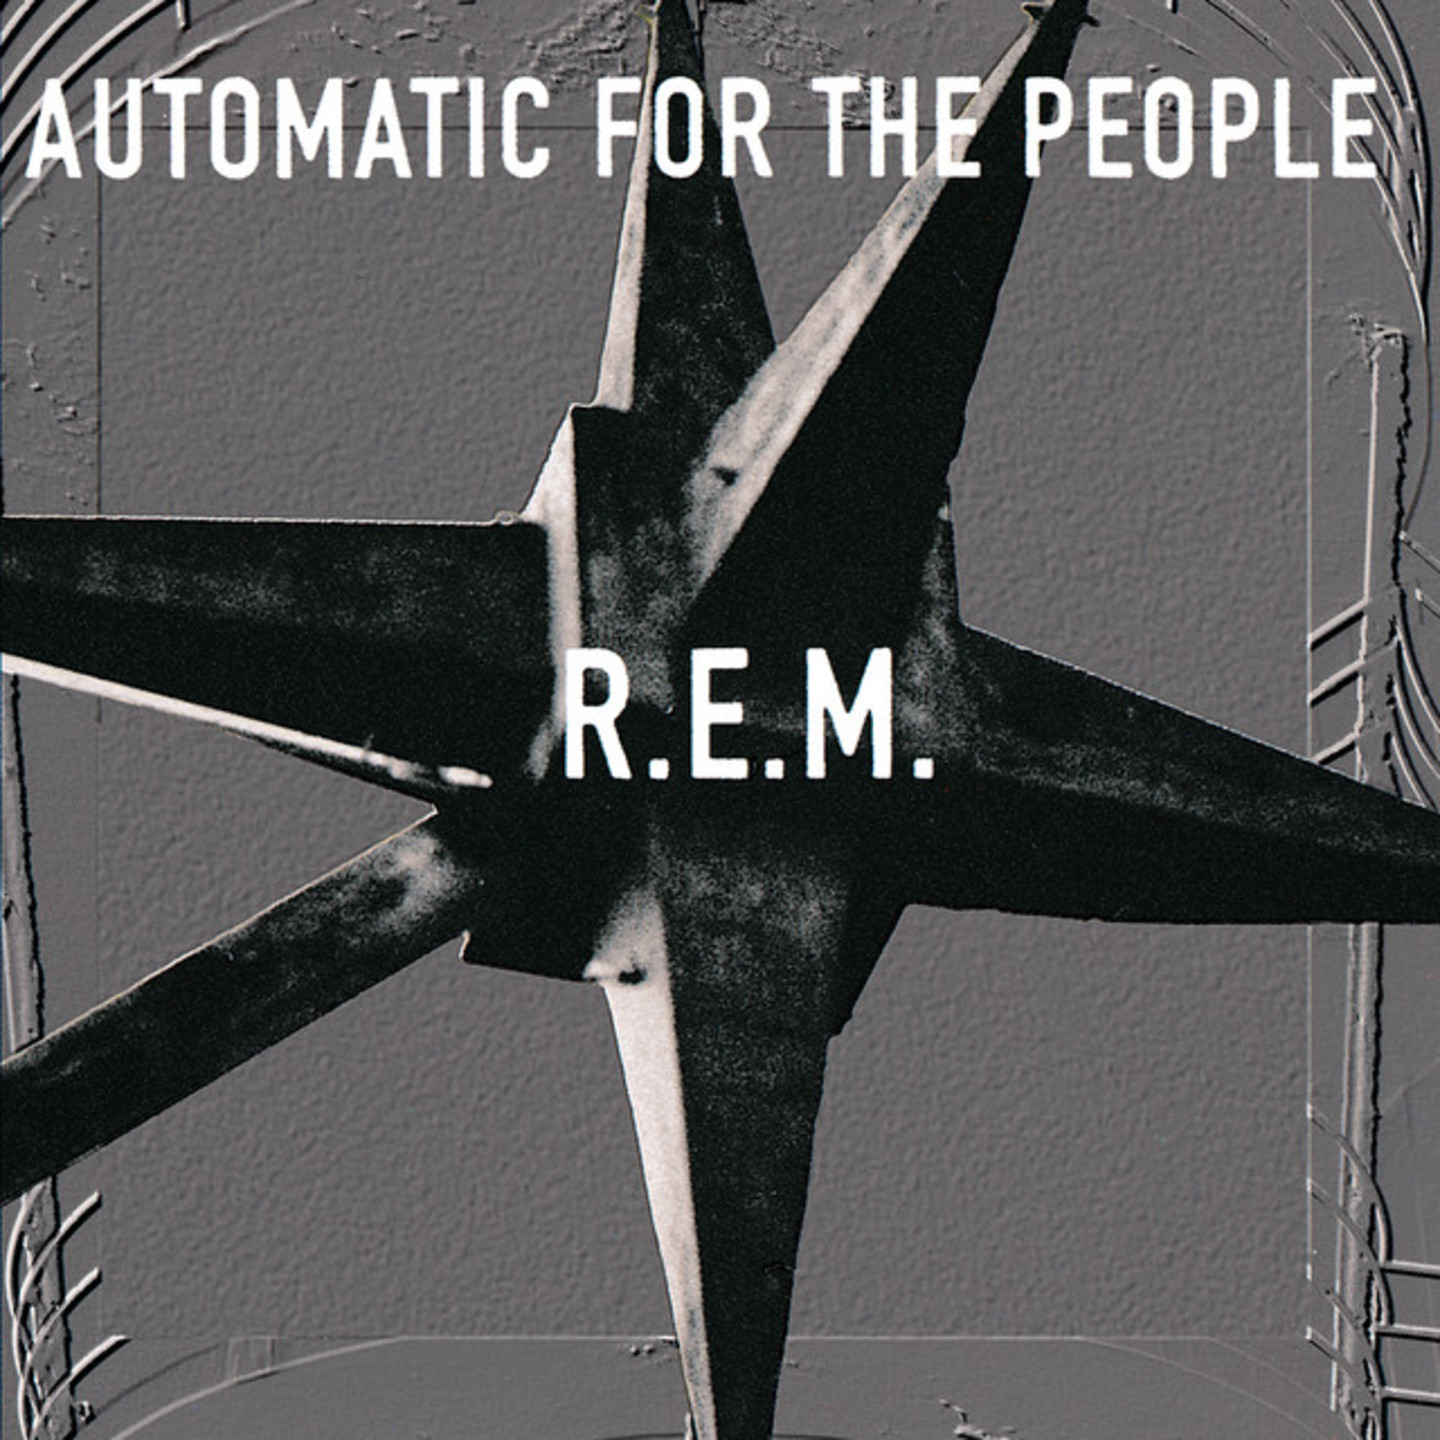 R.E.M. - Automatic For The People 25th Anniversary LP 180g Vinyl